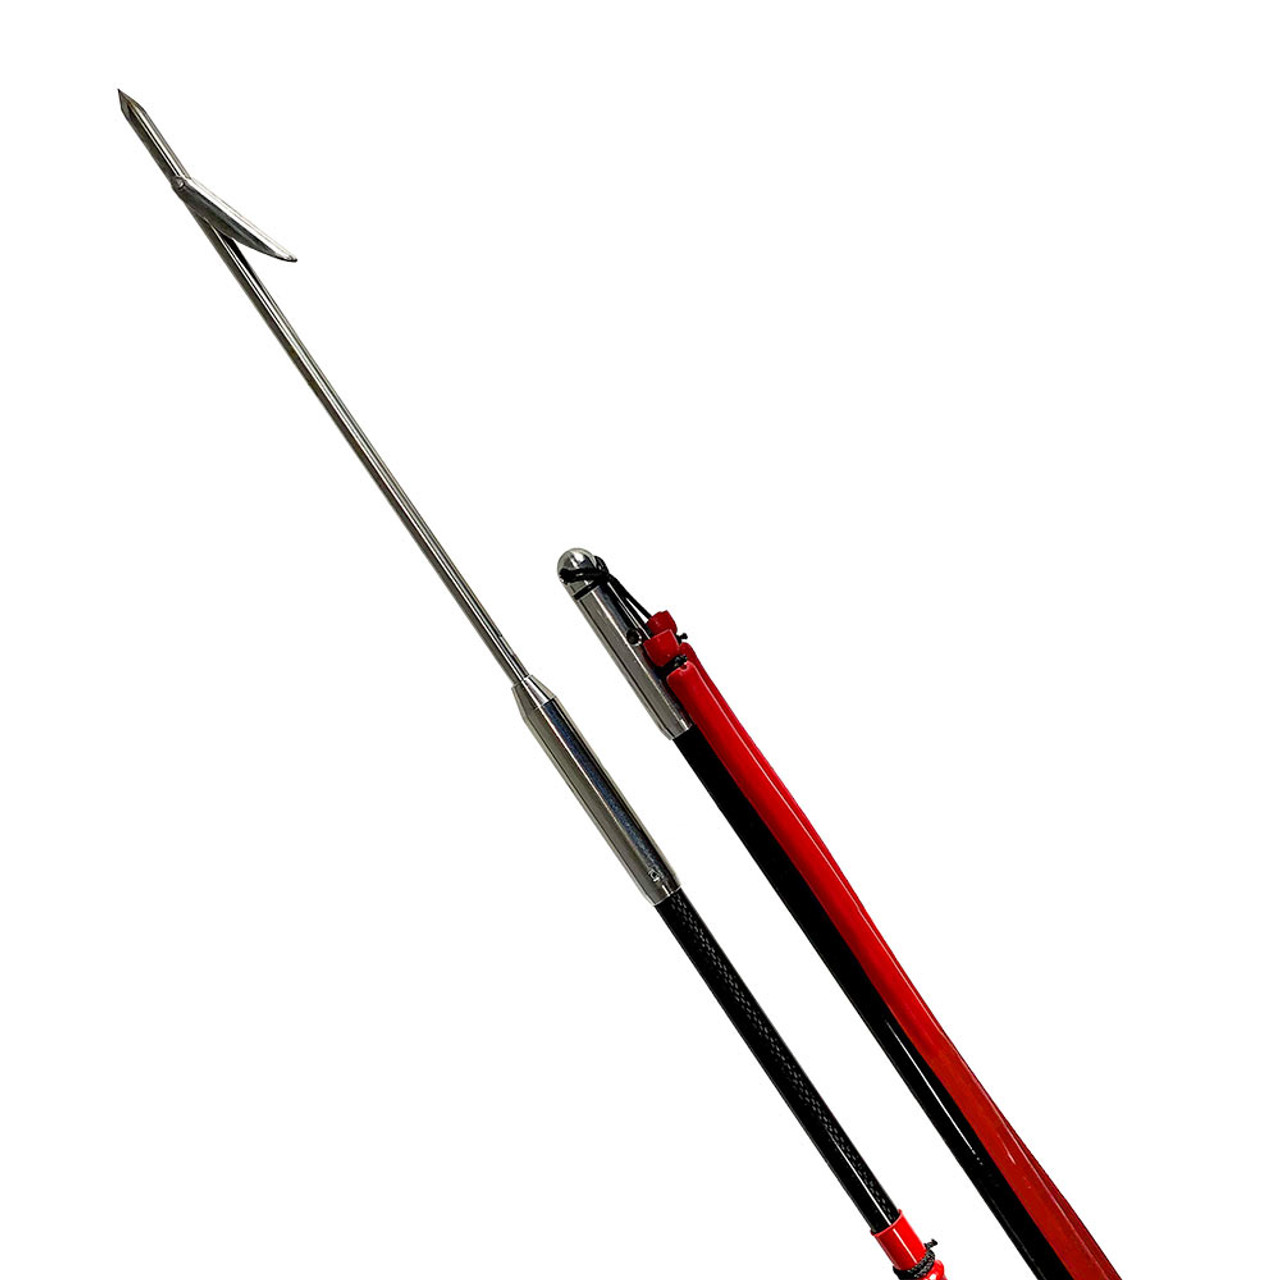 Scuba Choice 7' One Piece Spearfishing Fiber Glass Pole Spear with 3 Prong Barb SS Paralyzer Tip